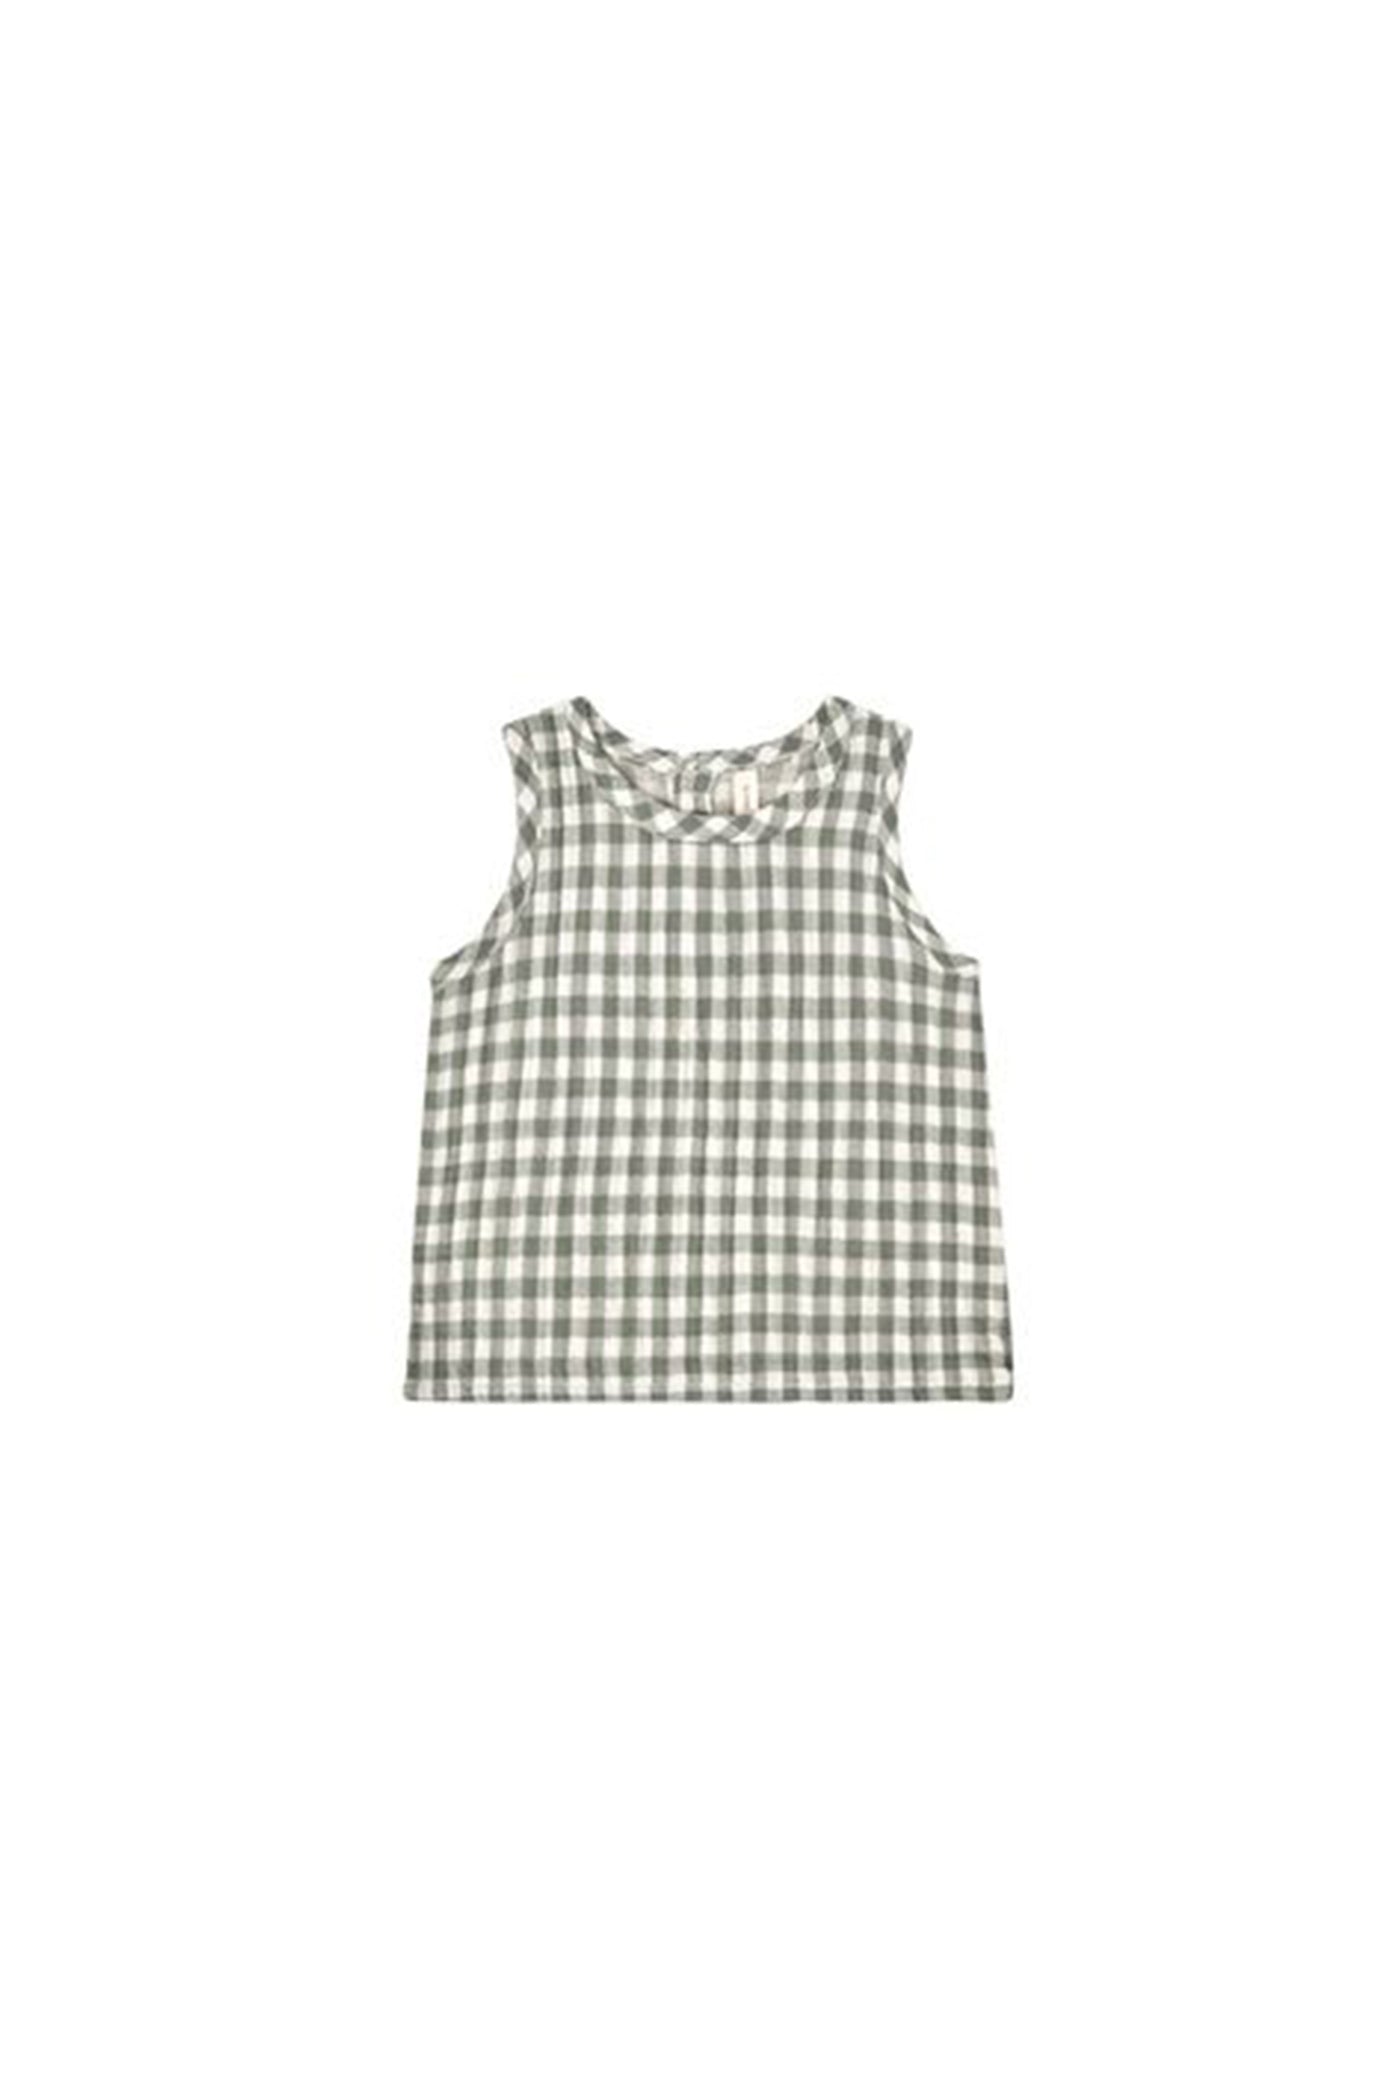 Woven Kids Tank by Quincy Mae